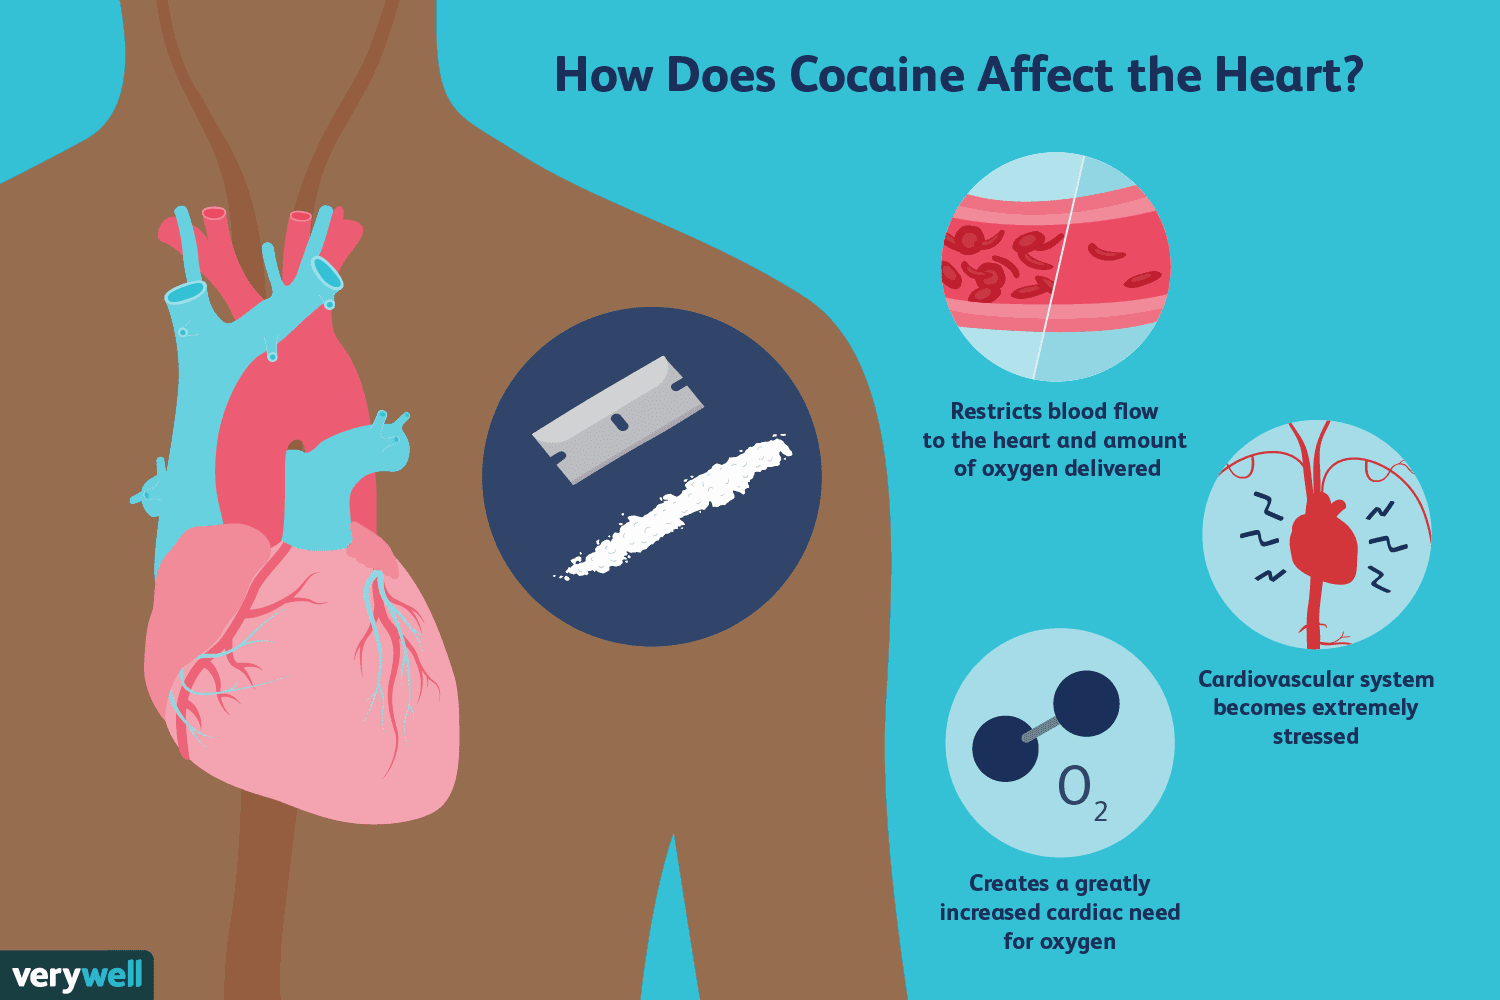 How Cocaine Affects the Cardiovascular System